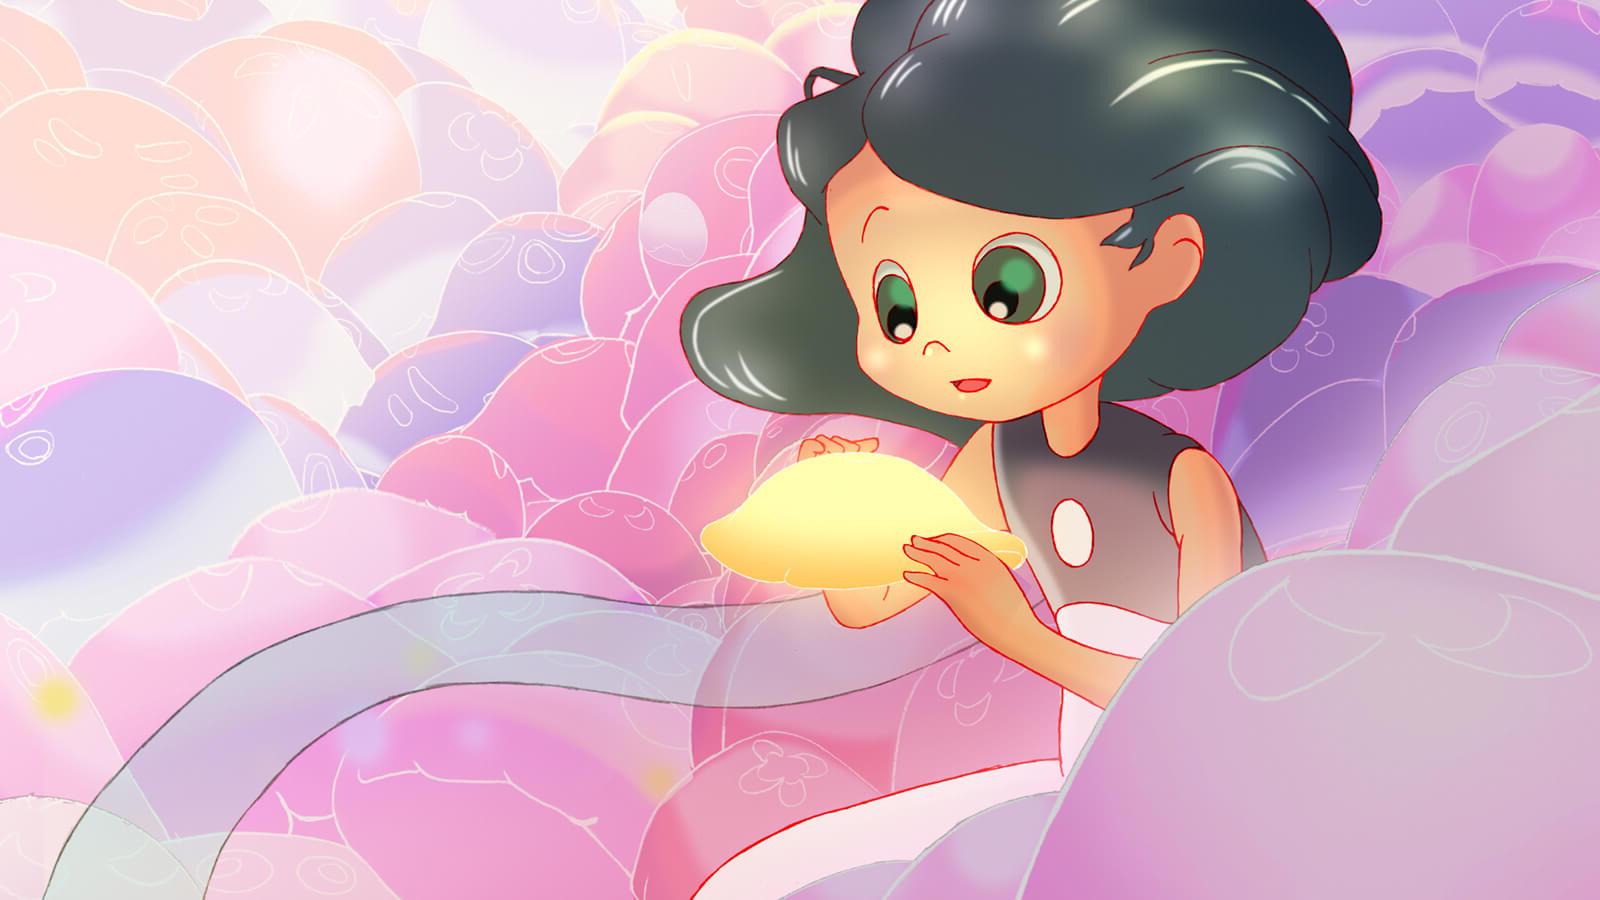 A girl with black hair and green eyes holds a yellow jellyfish in her hands, 被粉色包围, 紫色的, 橙色水母